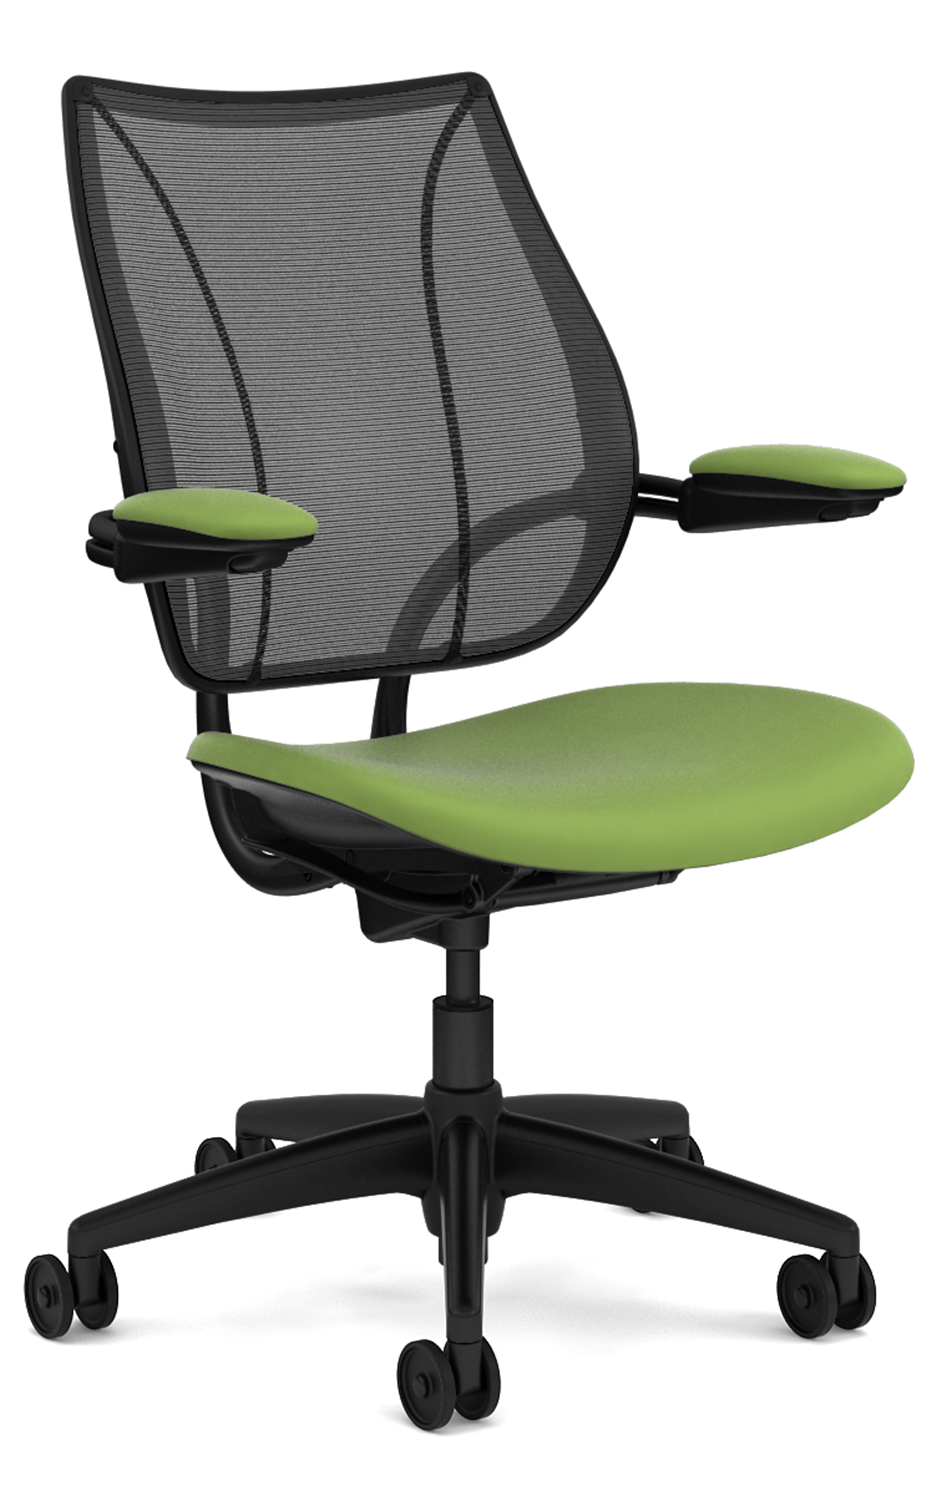 Humanscale Liberty Adjustable Arm Office Chair